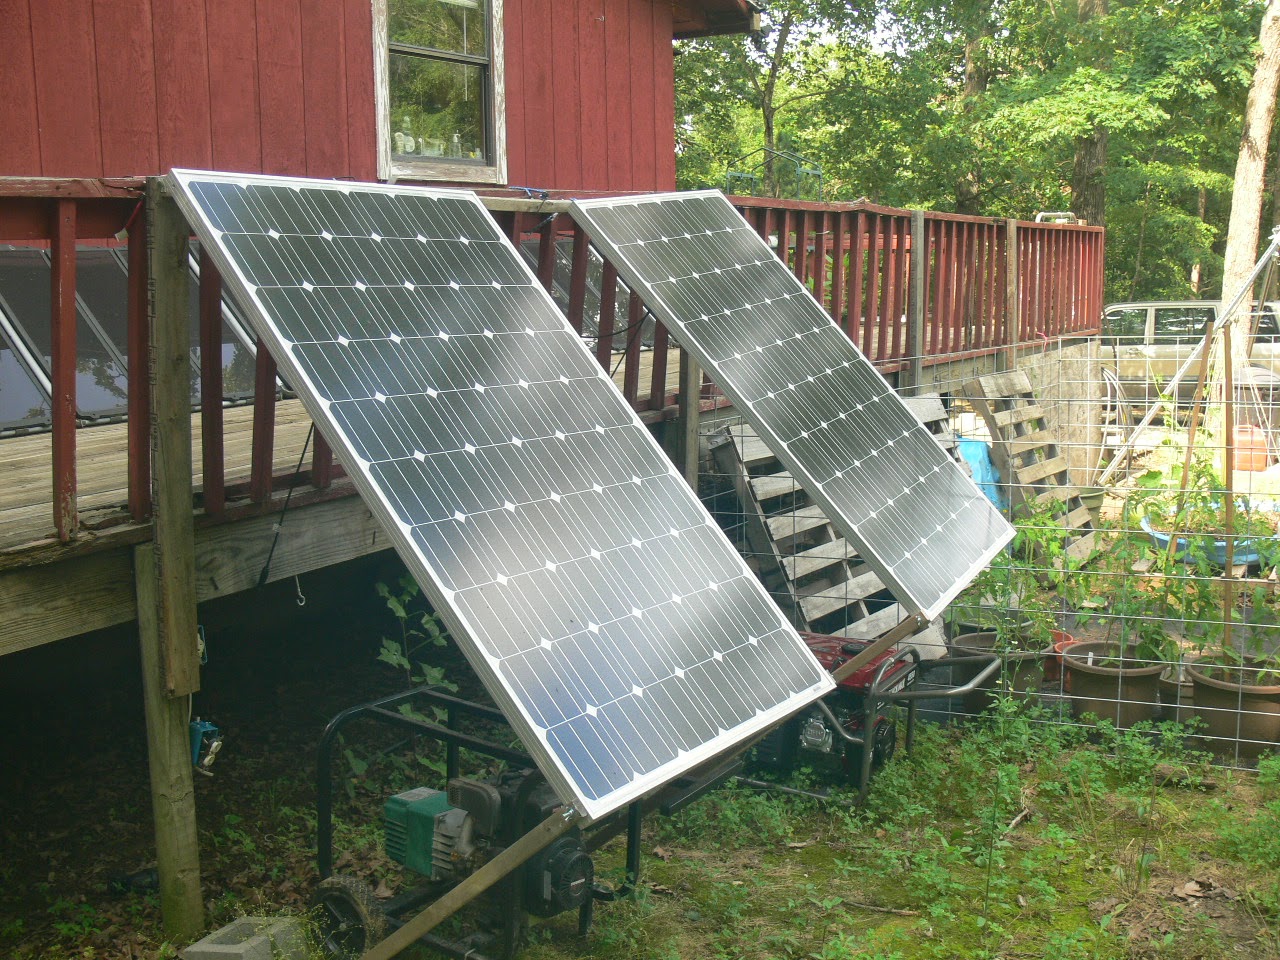 Off-Grid Geeks: 2014 Updates to our Solar Electric System